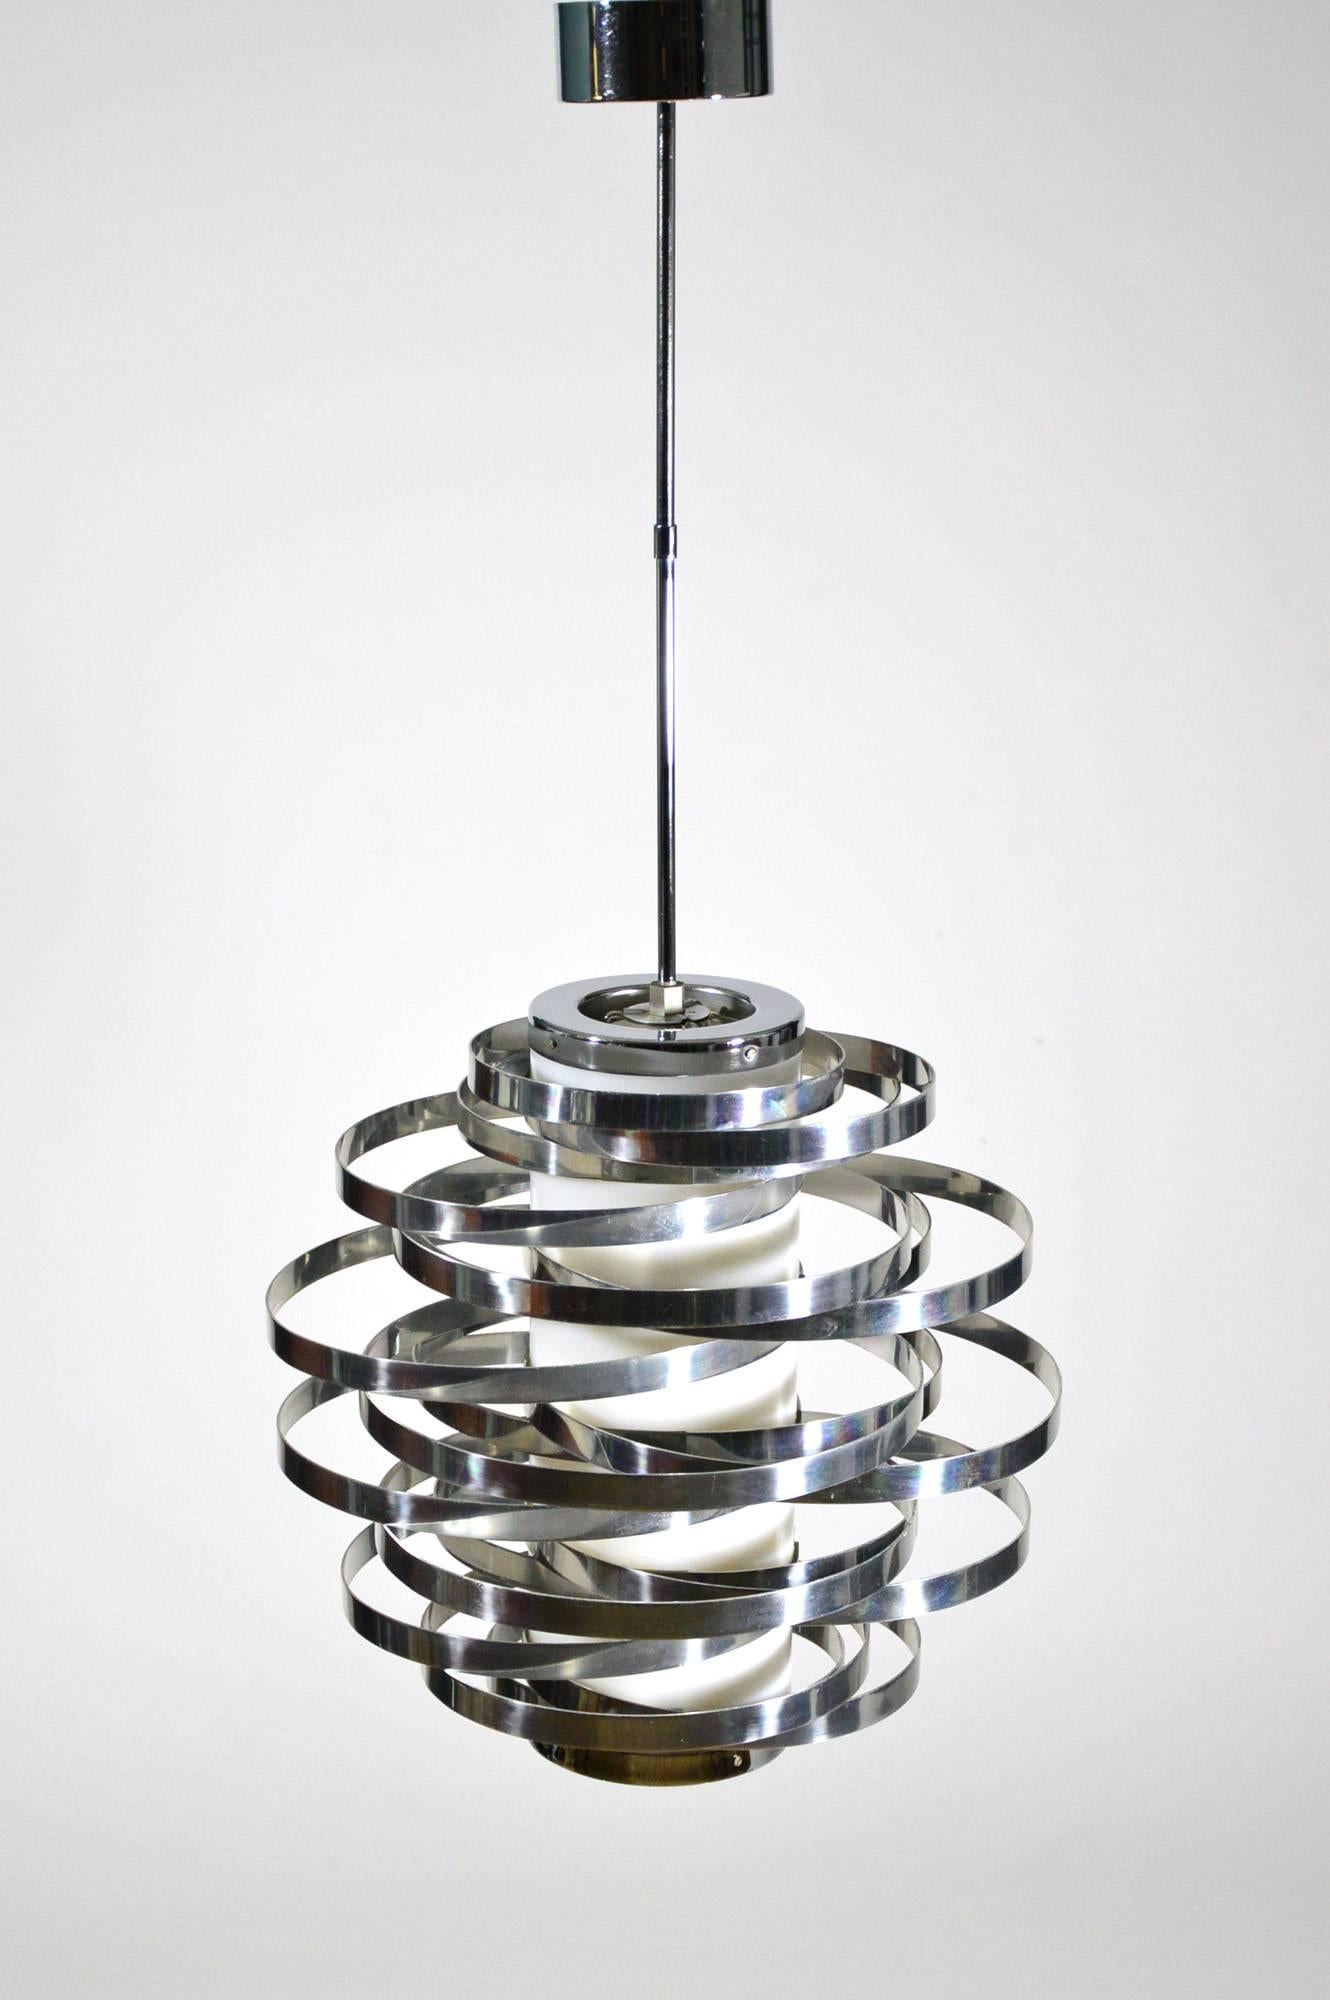 An iconic piece of Italian design from 1970s, the Cyclone chandelier, manufactured by Sciolari, Rome, circa 1970.
It's composed by aluminium rings fixed around a perspex tube with a spiral geometry.
It has a e27 screw bulb socket. The stem is